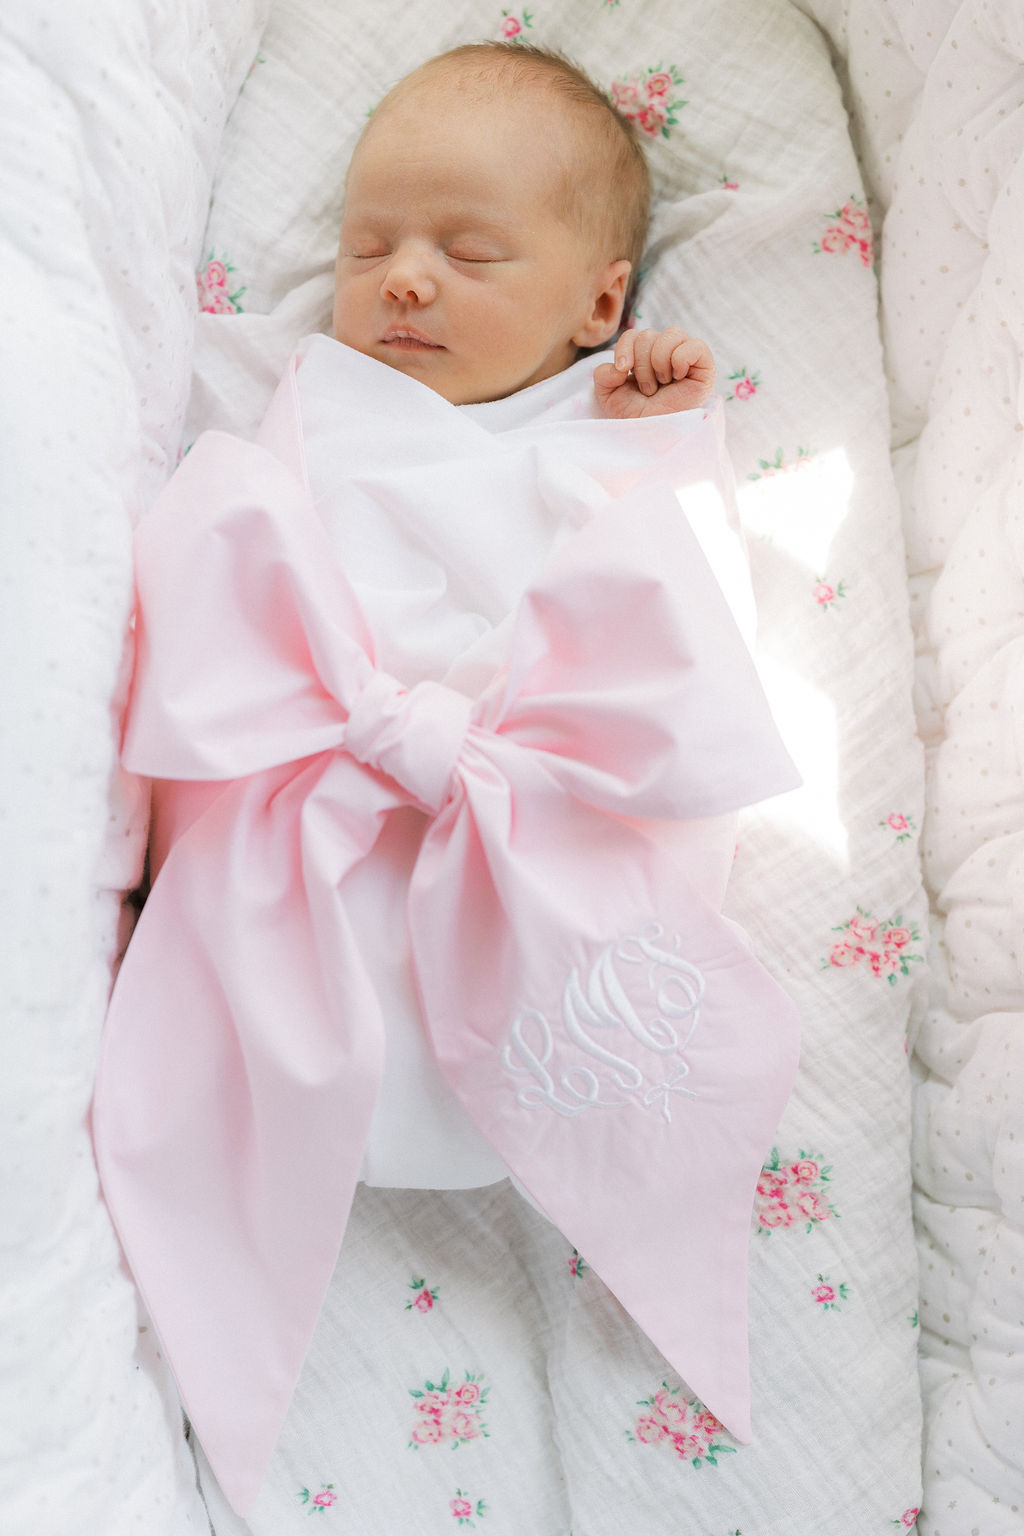 A newborn baby sleeps in a blanketed crib under a large pink embroidered bow thanks to the lactation place